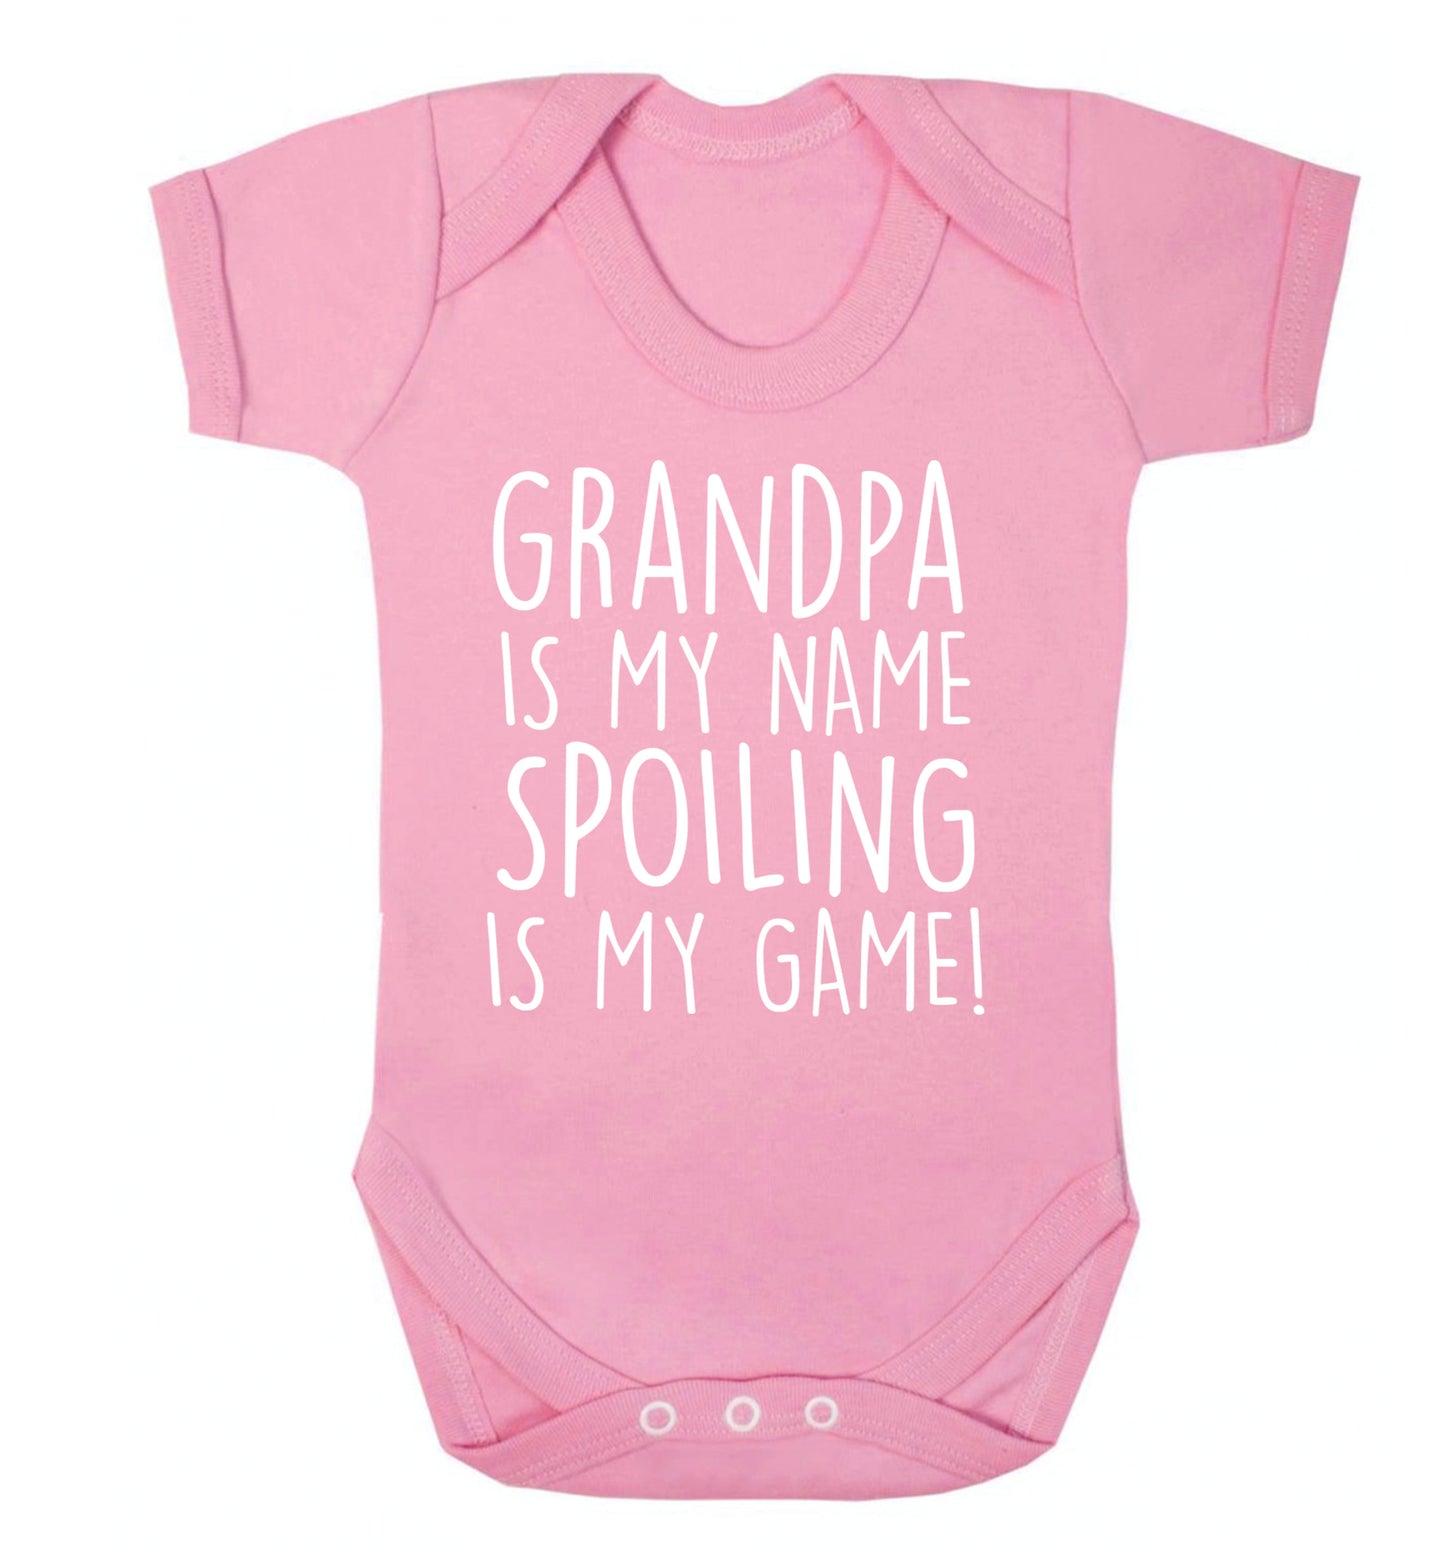 Grandpa is my name, spoiling is my game Baby Vest pale pink 18-24 months